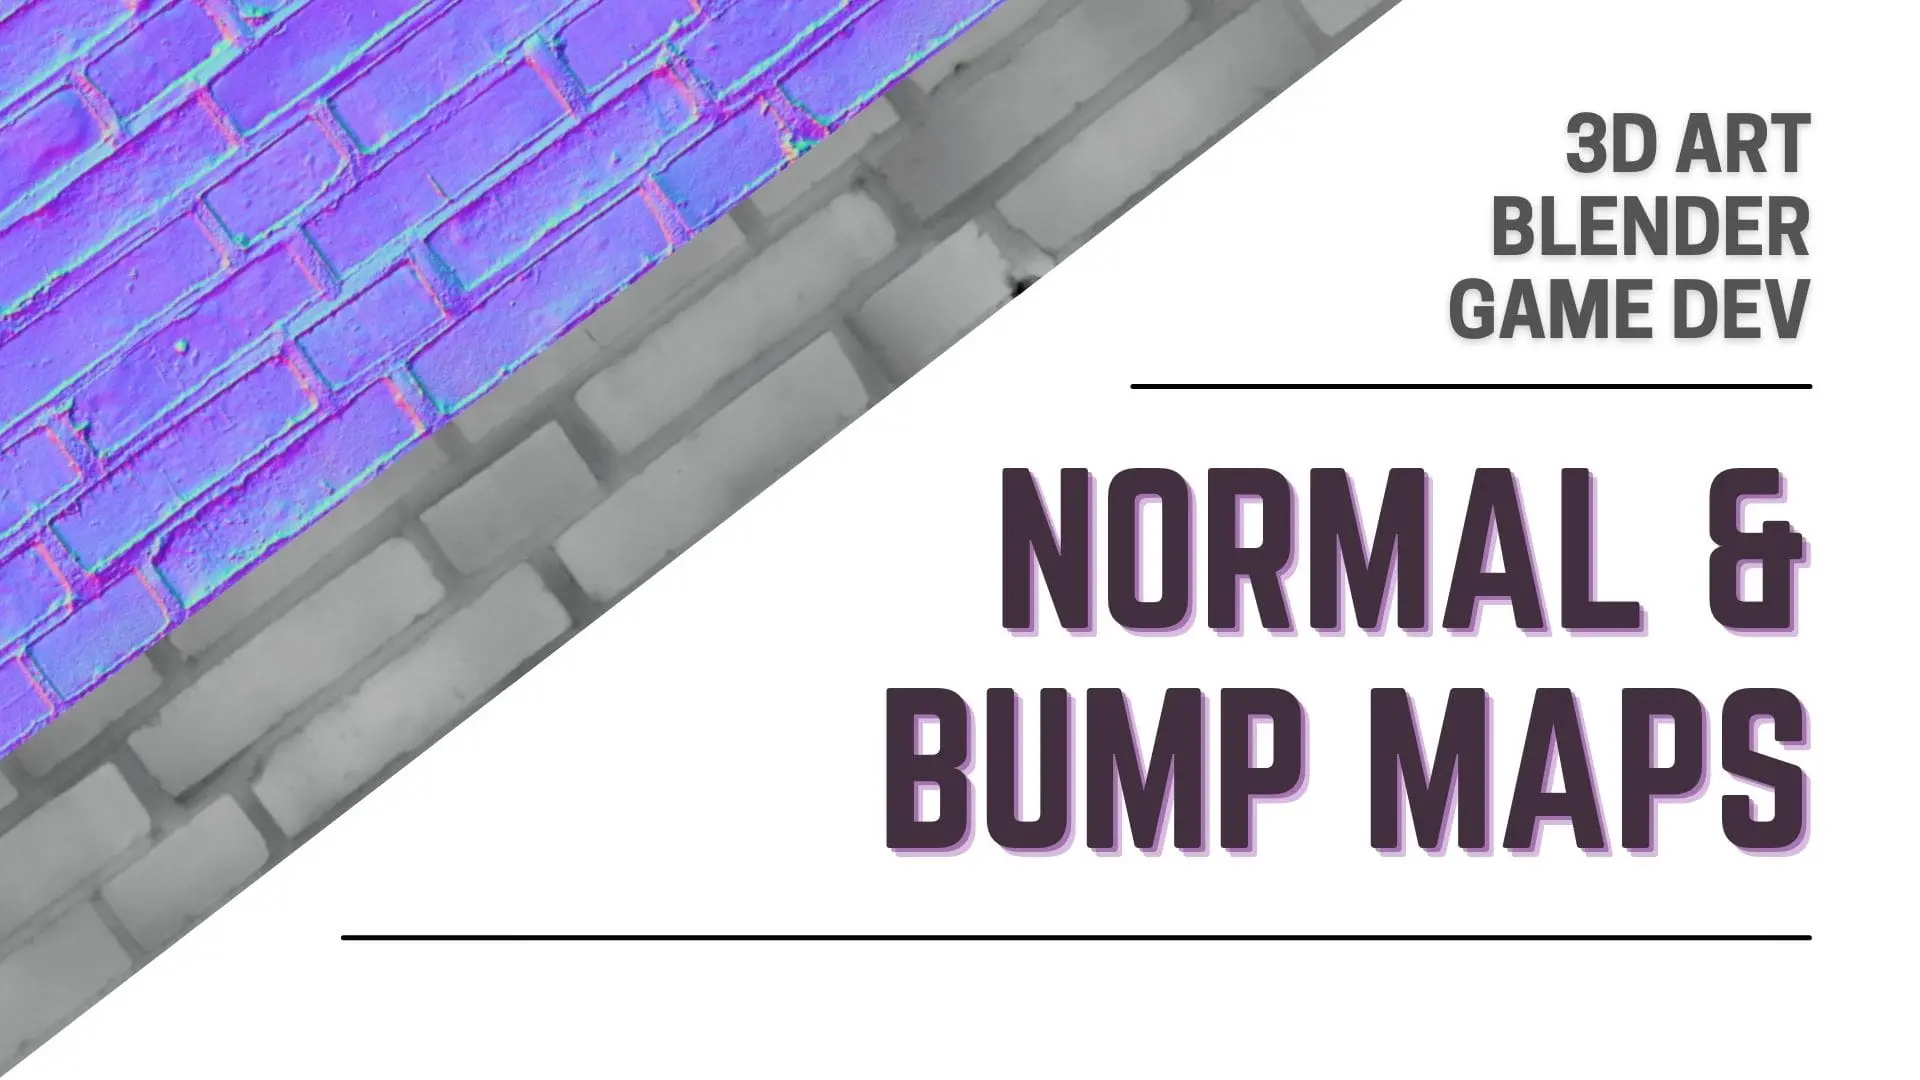 Normal Map - CG - Basics Of 3D Art For Game Development Tutorial - Featured Image